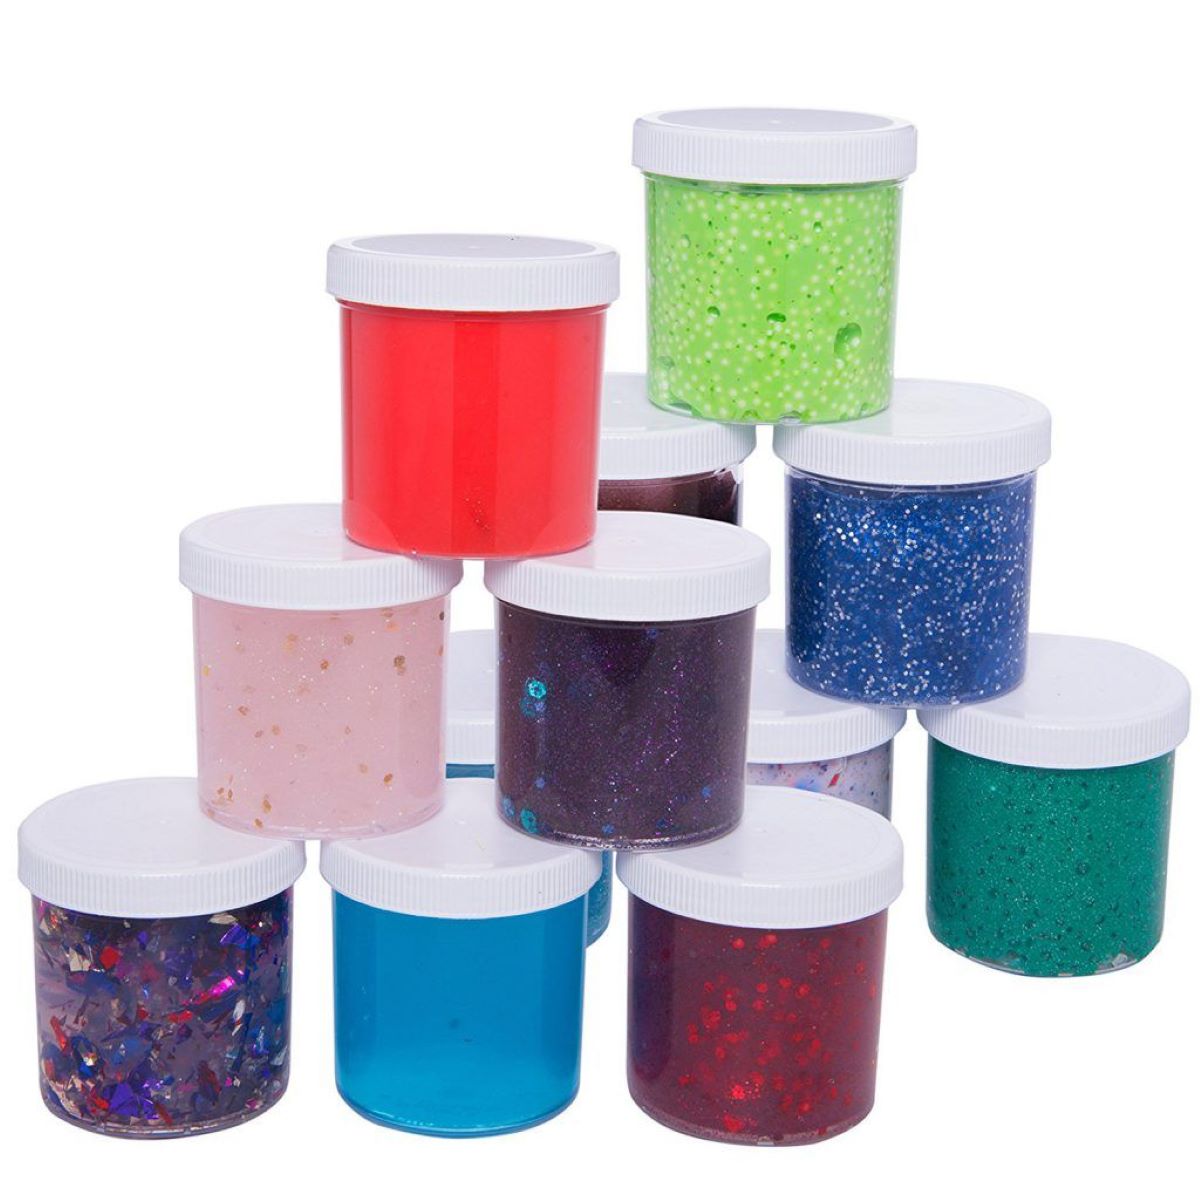 Where do I get these containers? : r/Slime